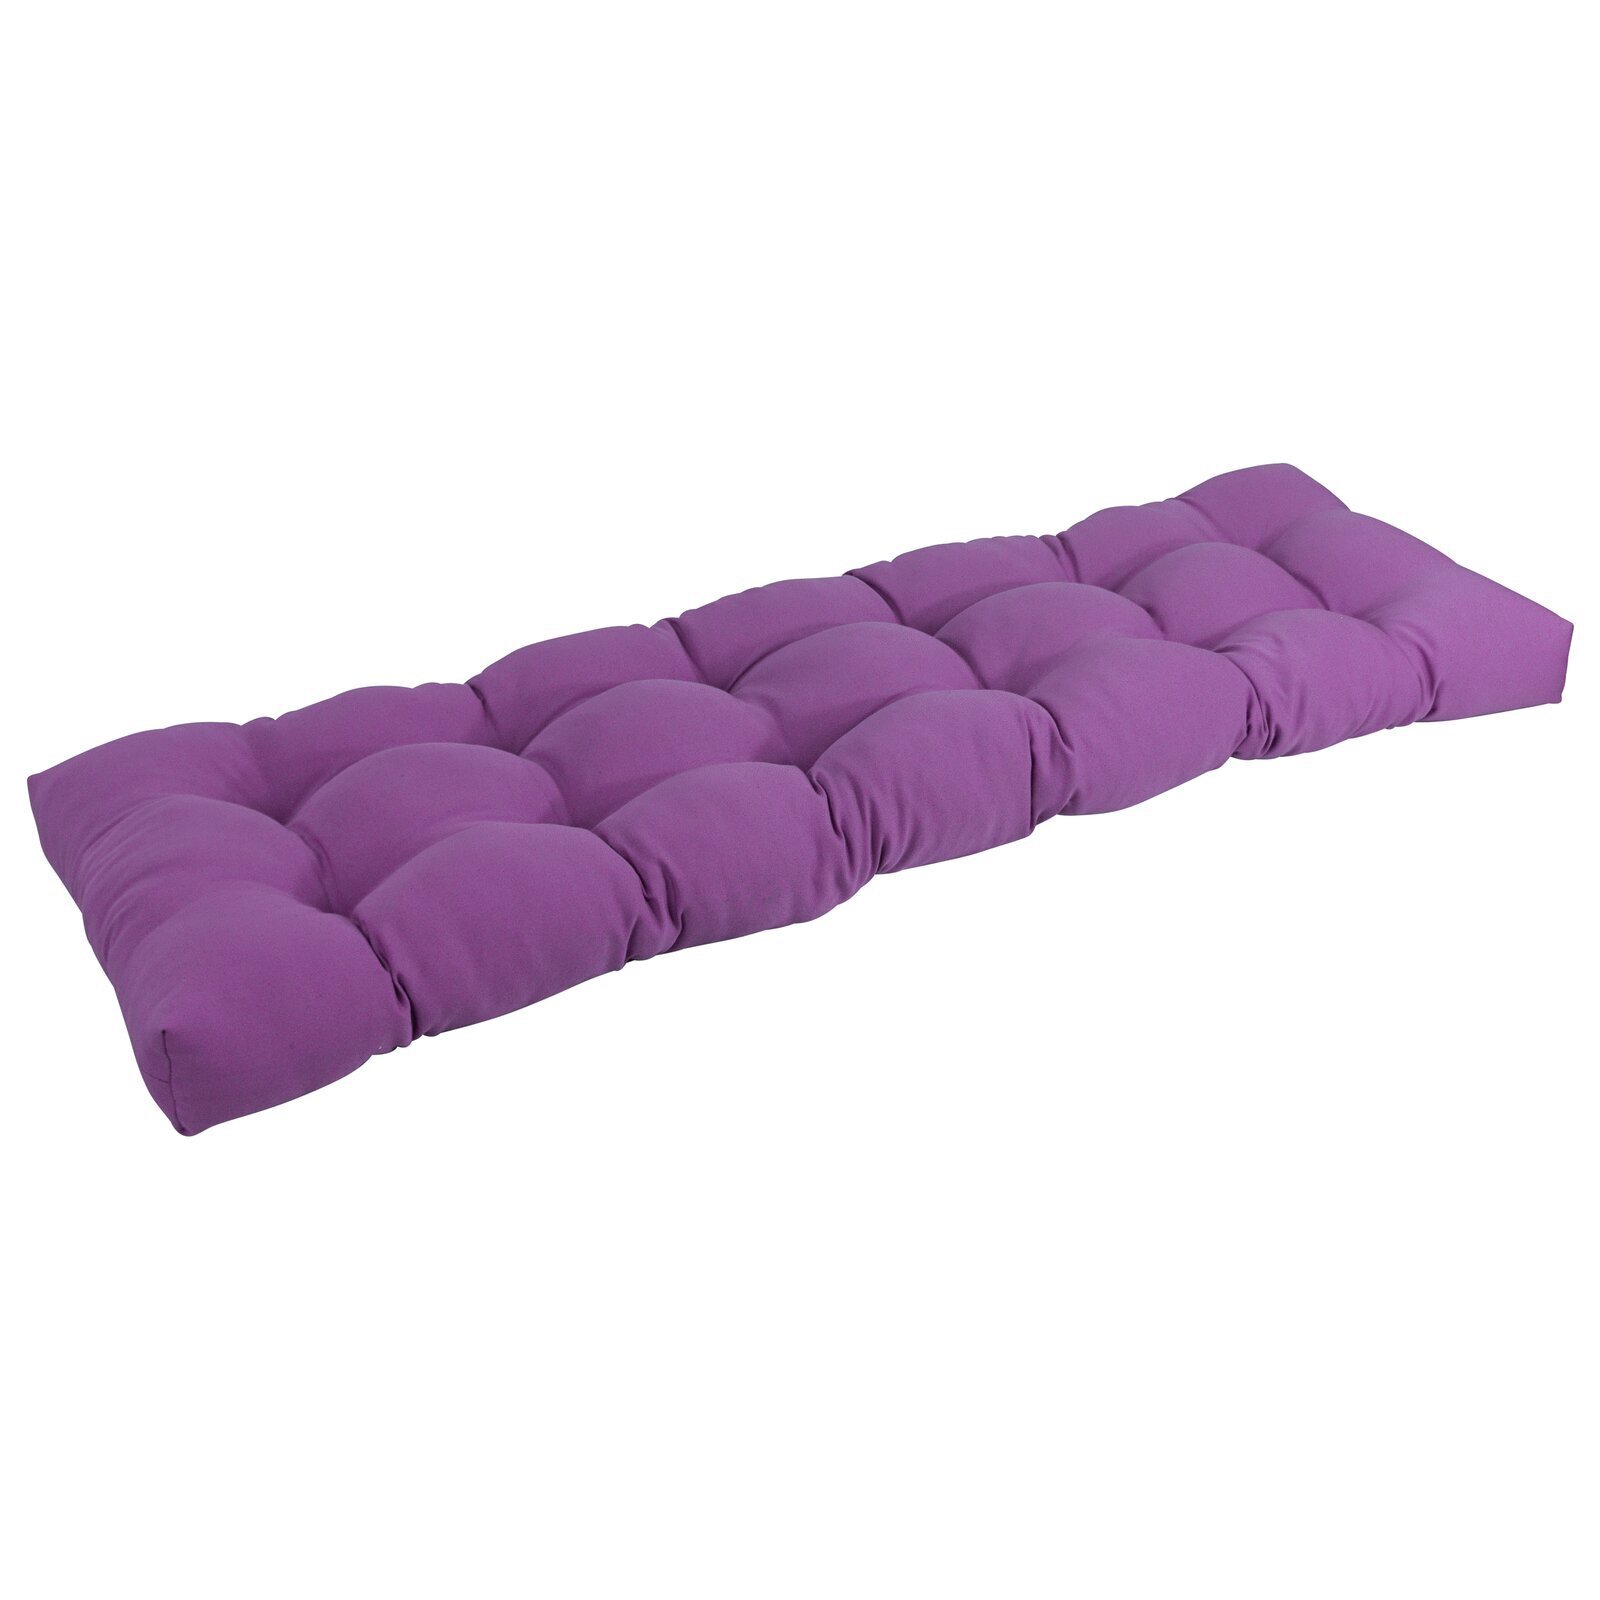 Quilted Purple Patio Furniture Cushion